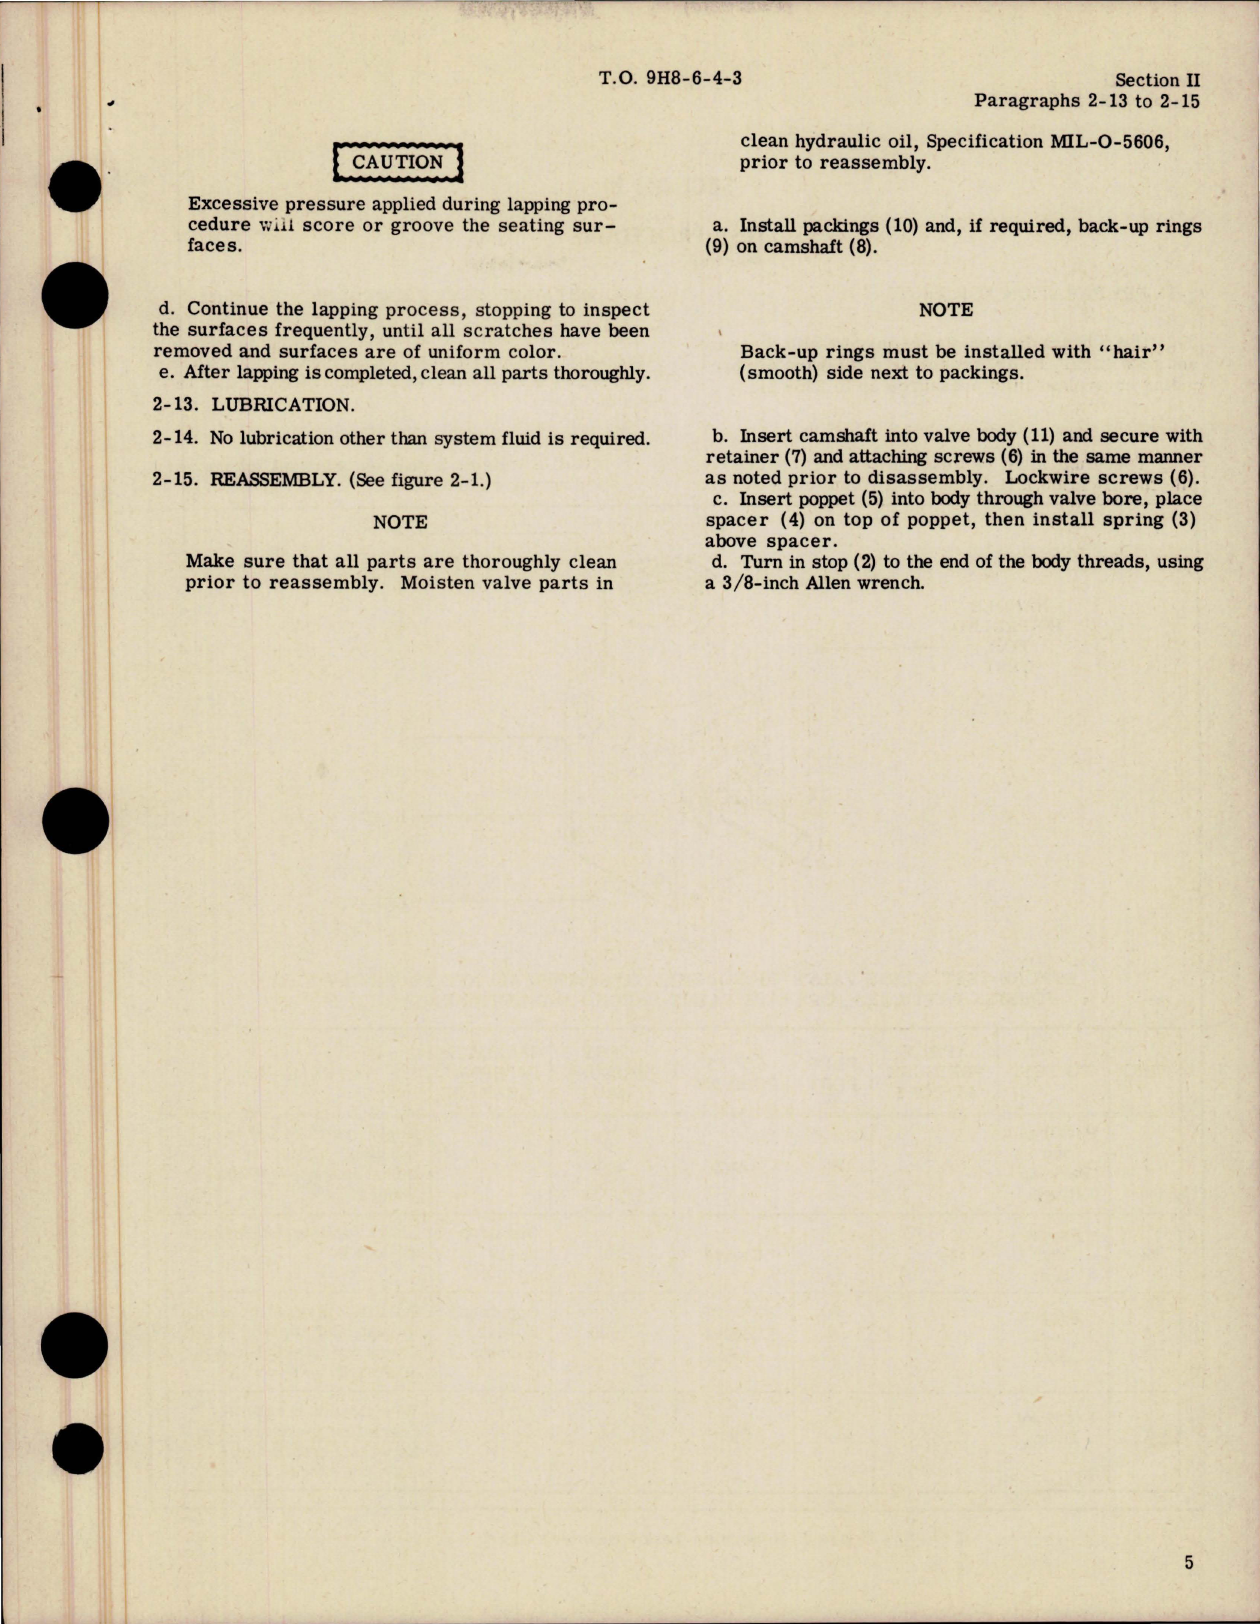 Sample page 7 from AirCorps Library document: Overhaul Instructions for Manually Operated Hydraulic Check Valves 